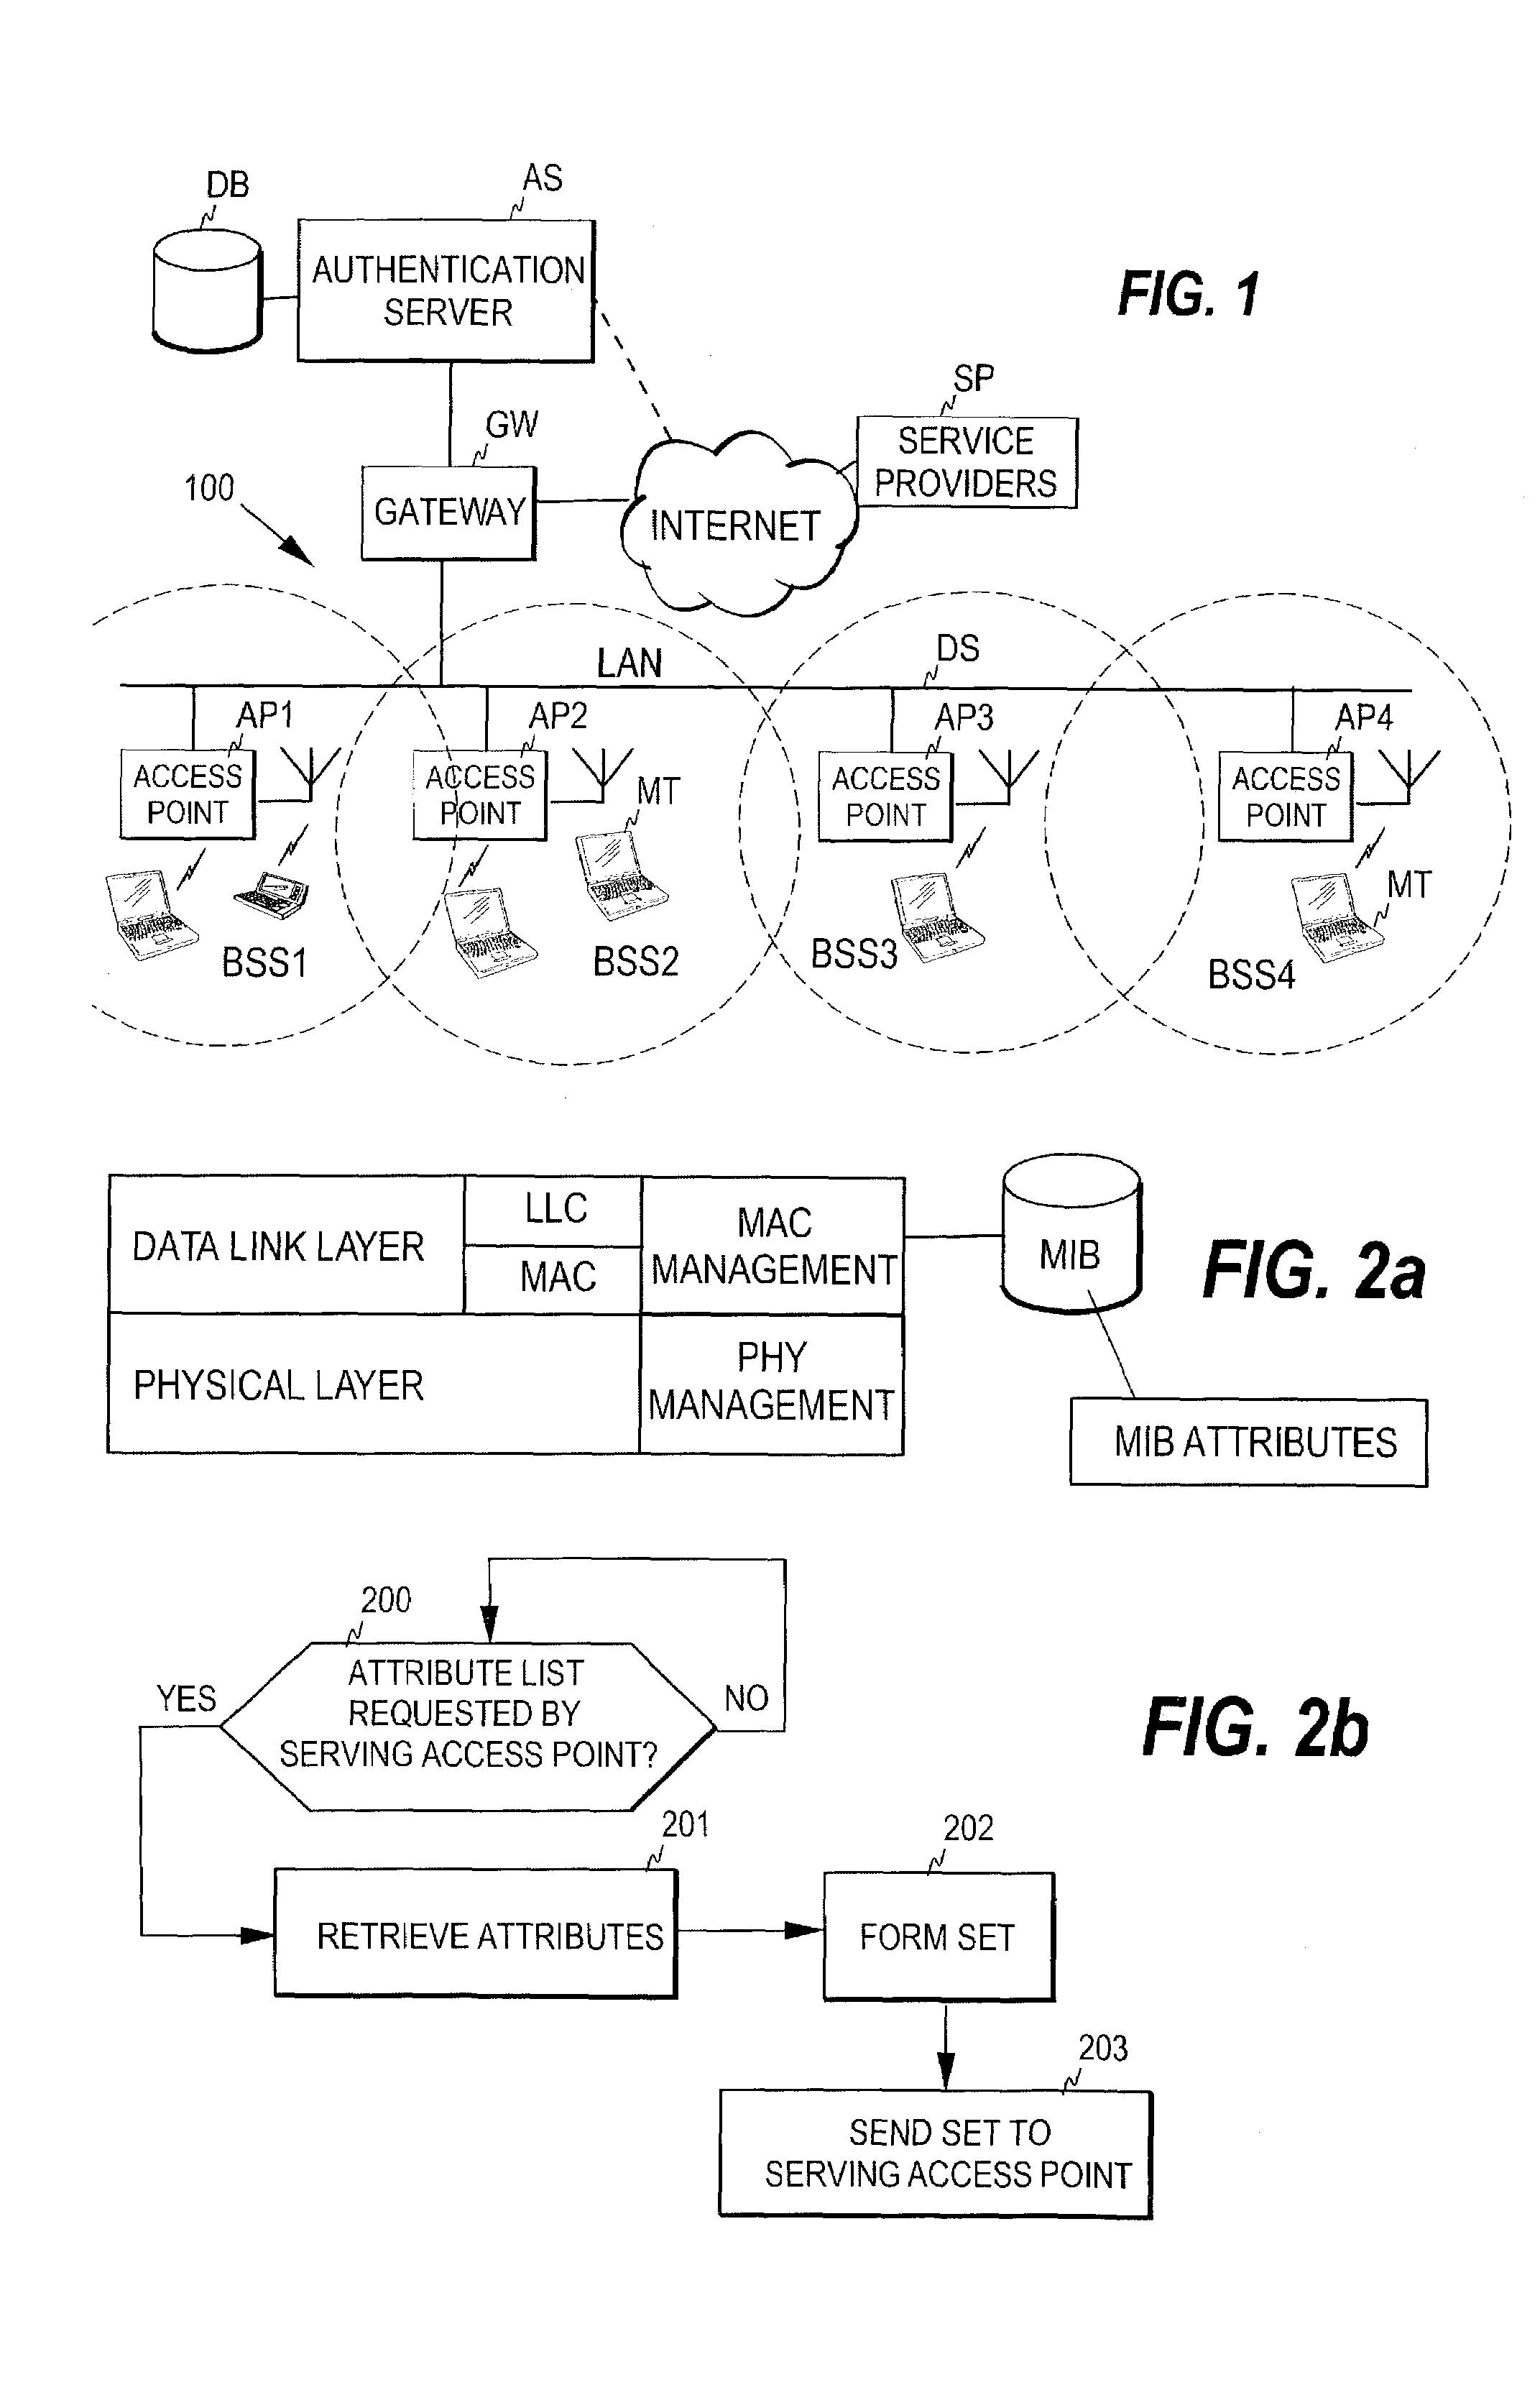 Selection of access point in a wireless communication system